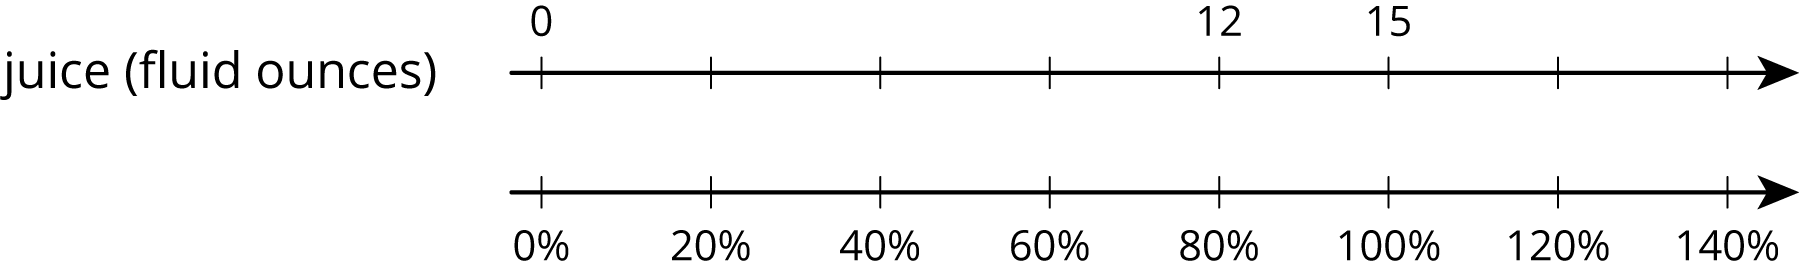 A double number line for “juice in fluid ounces” with 8 evenly spaced tick marks. The top number line has the number zero on the first tick mark, 12 on the fifth, and 15 on the sixth. The bottom number line, starting with the first tick mark, zero percent, 20 percent, 40 percent, 60 percent, 80 percent, 100 percent, 120 percent and 140 percent are labeled.